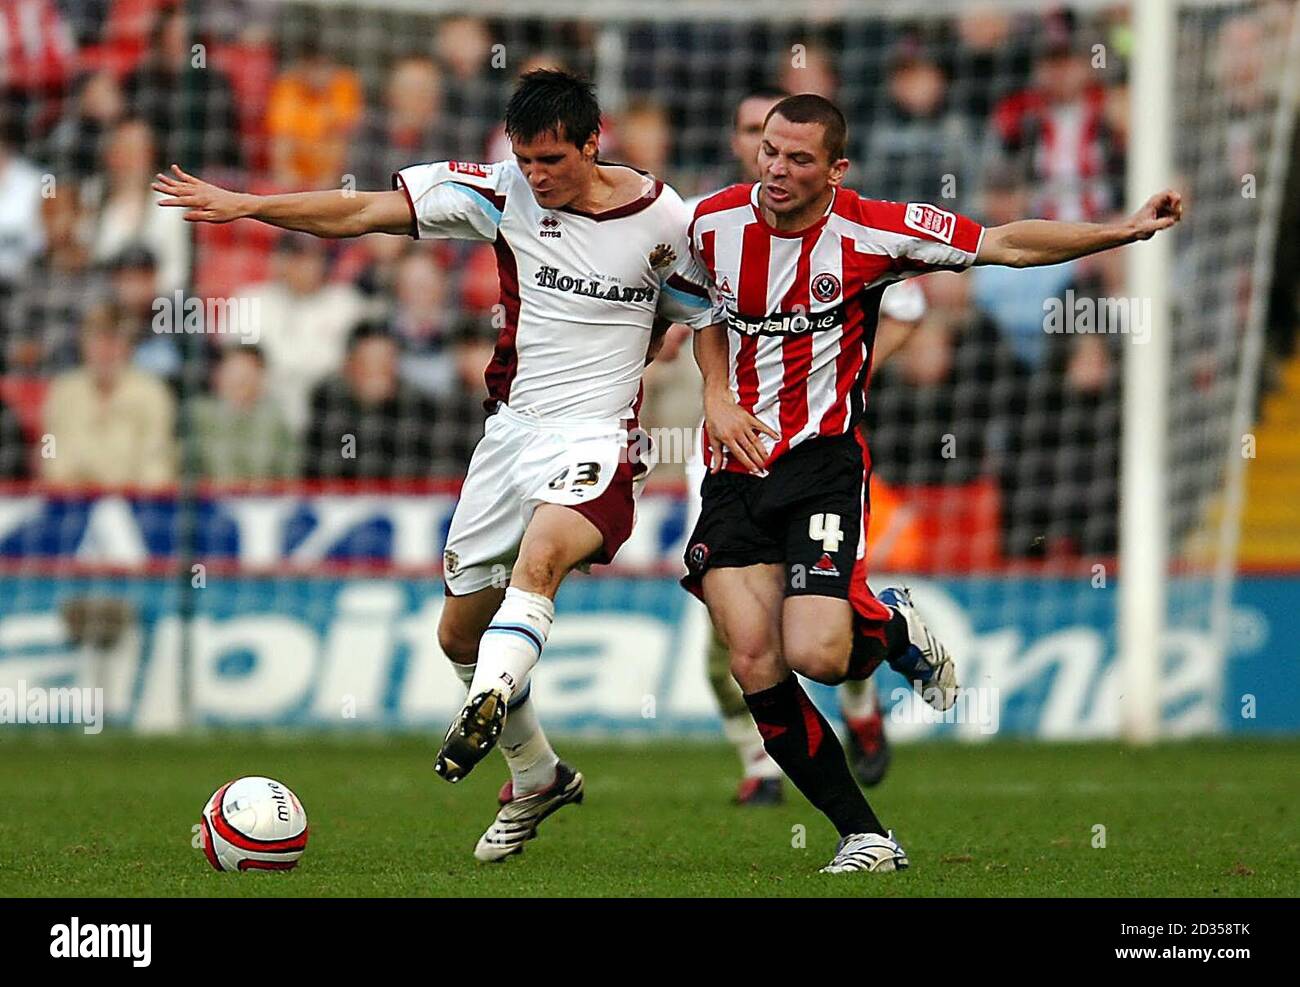 Sheffield United's Phil Bardsley (right) and Burnley's Stephen Jordan in action during the Coca-Cola Football Championship match at Bramall Lane, Sheffield. Stock Photo